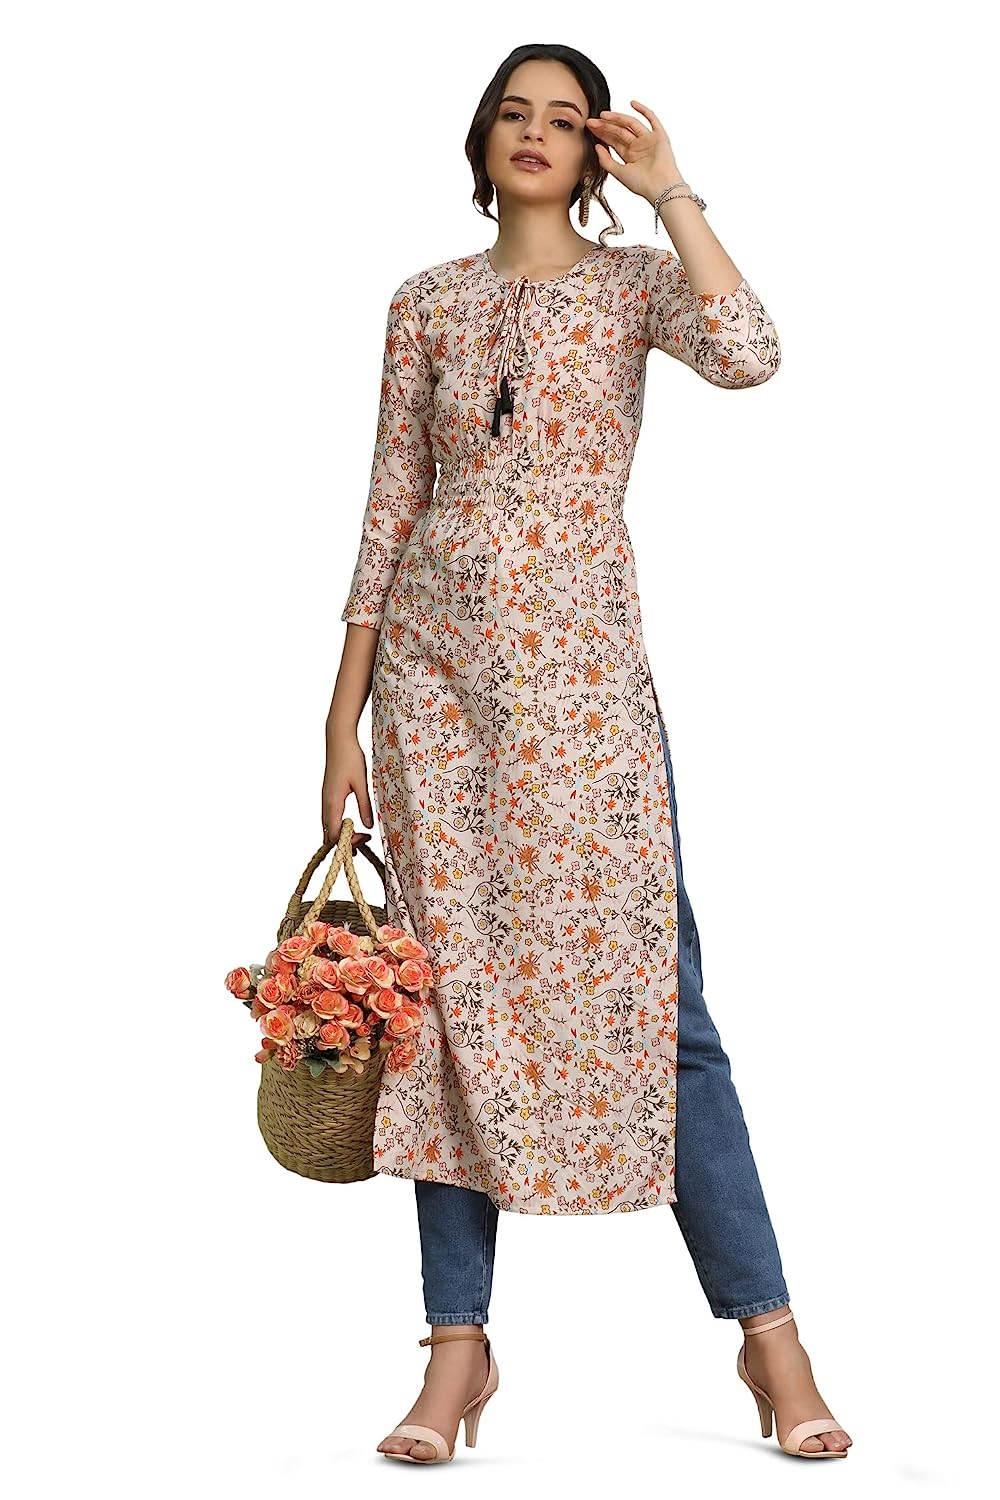 Lymio Women's Rayon A-Line Maxi Dress -  Dresses in Sri Lanka from Arcade Online Shopping - Just Rs. 3799!